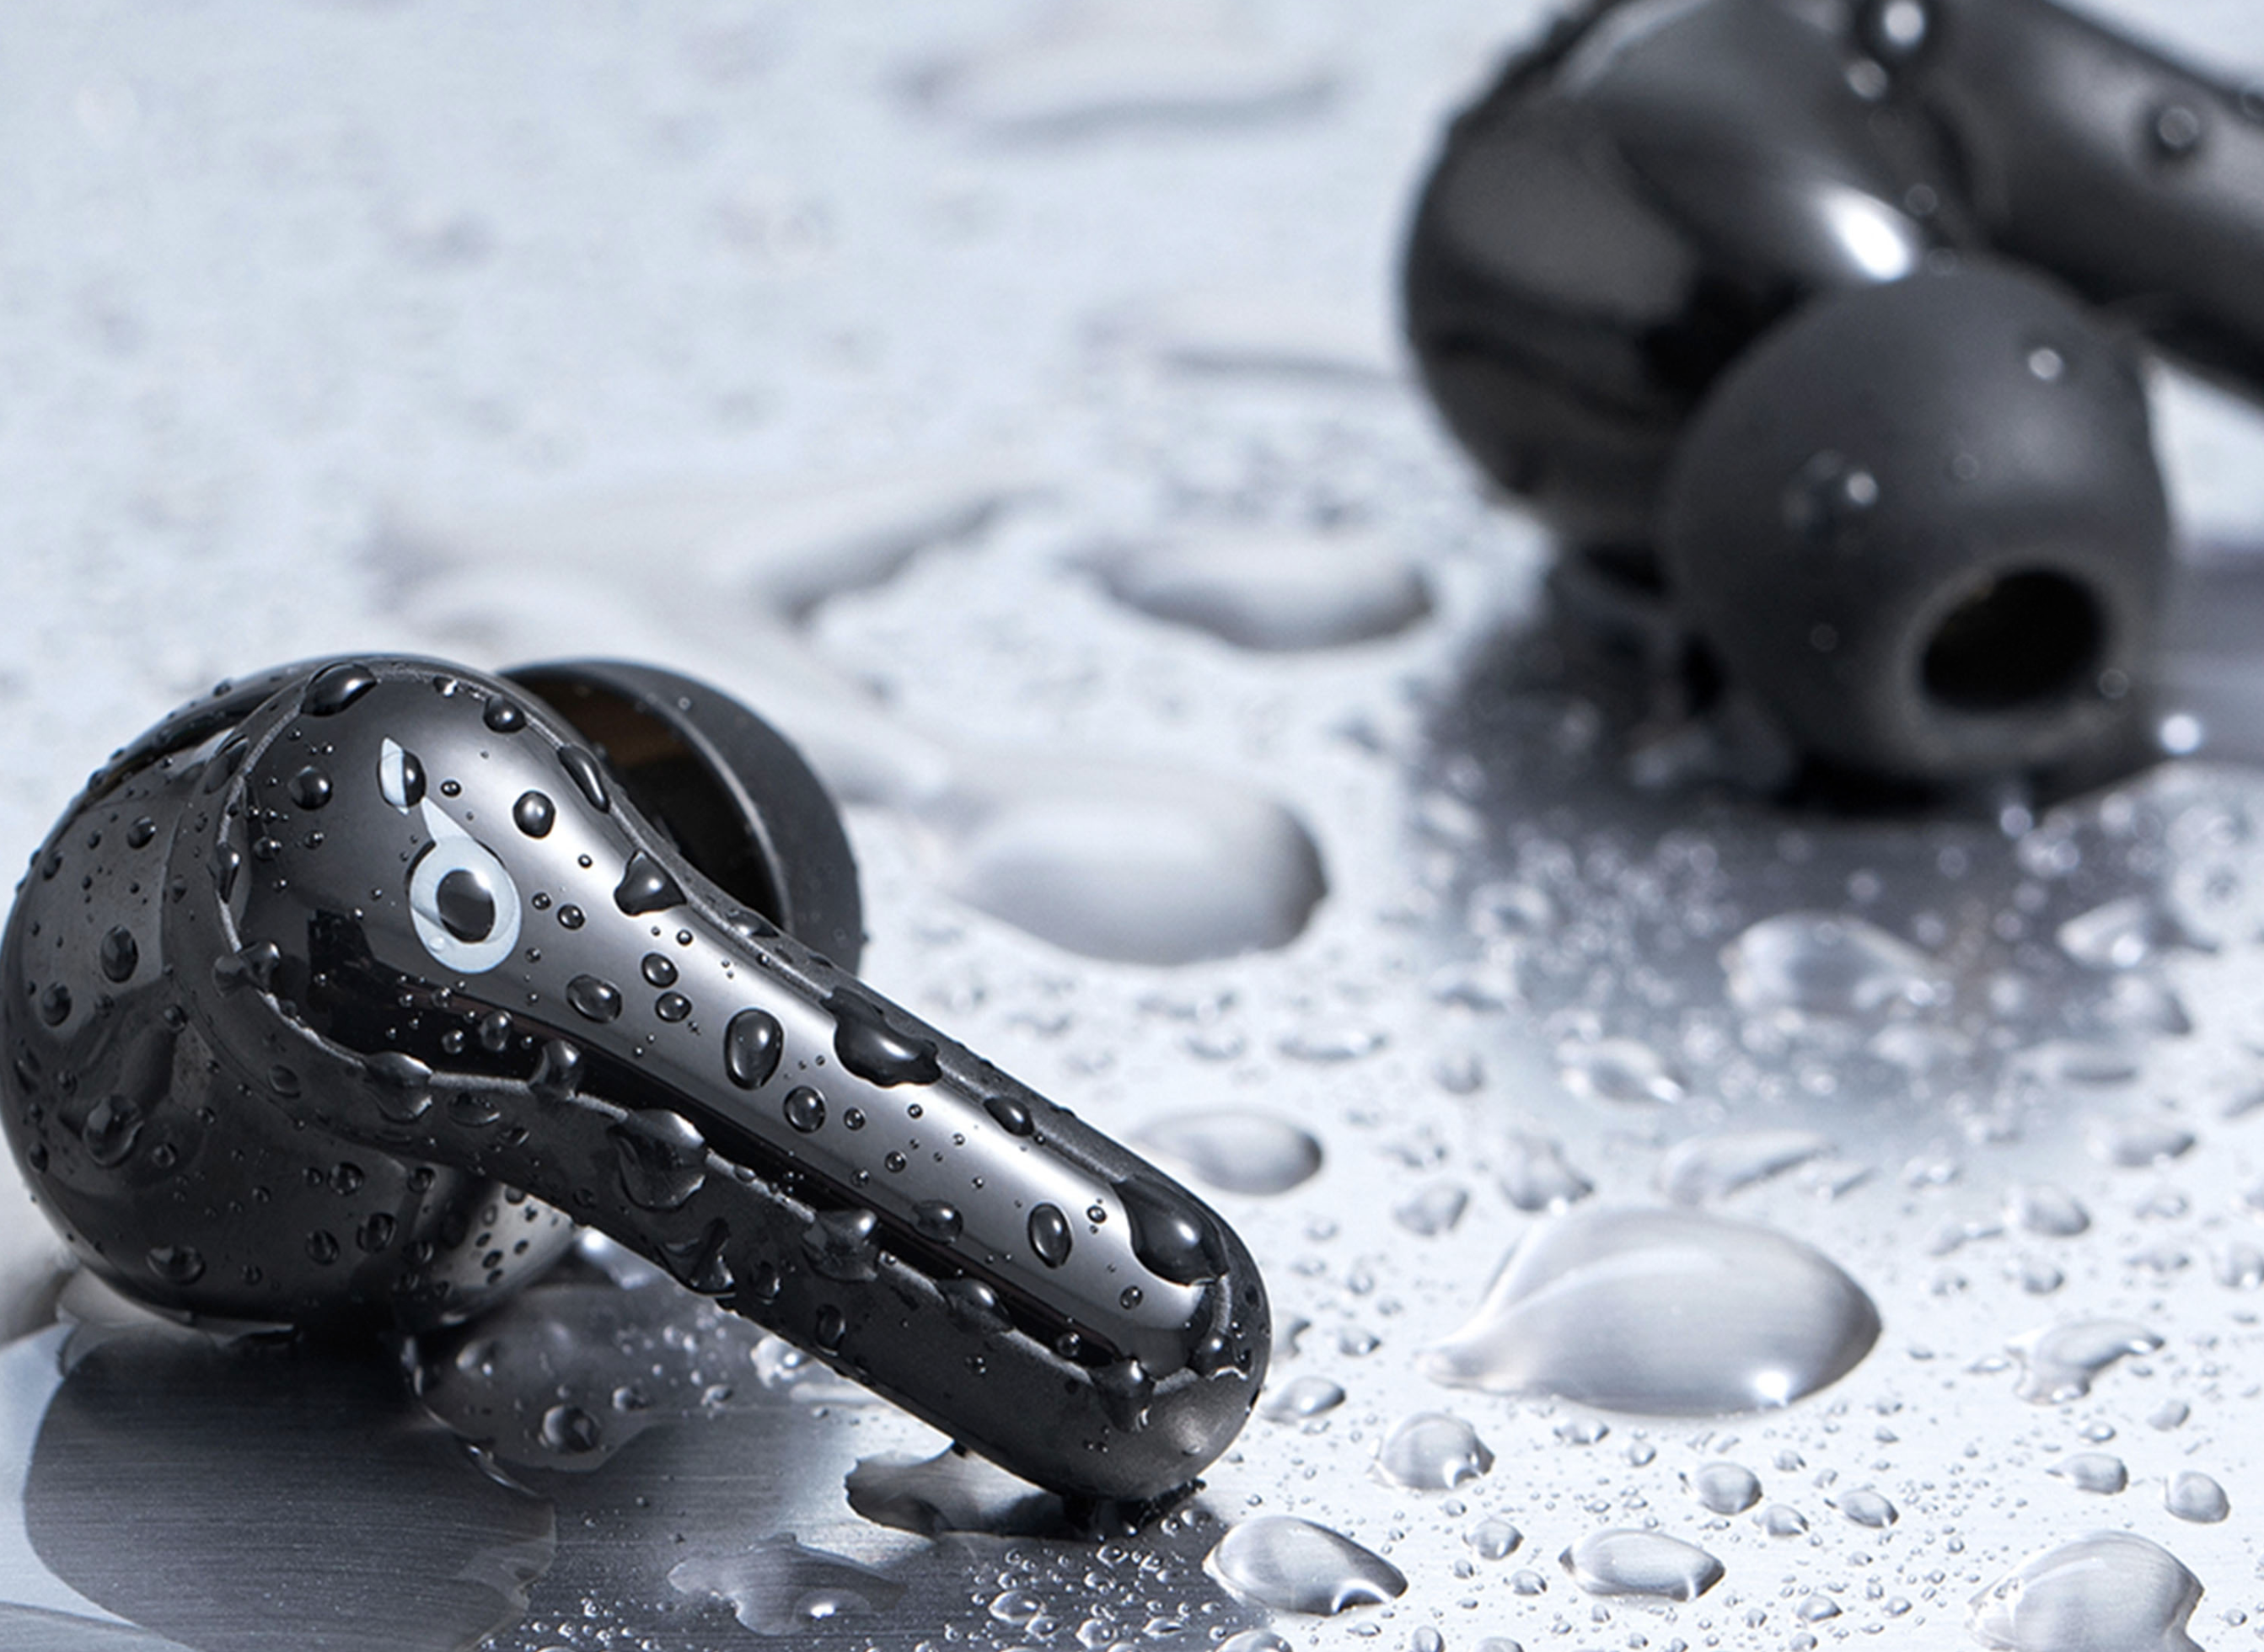 The Anker Soundcore Life Note C wireless earbuds with droplets of water on them.